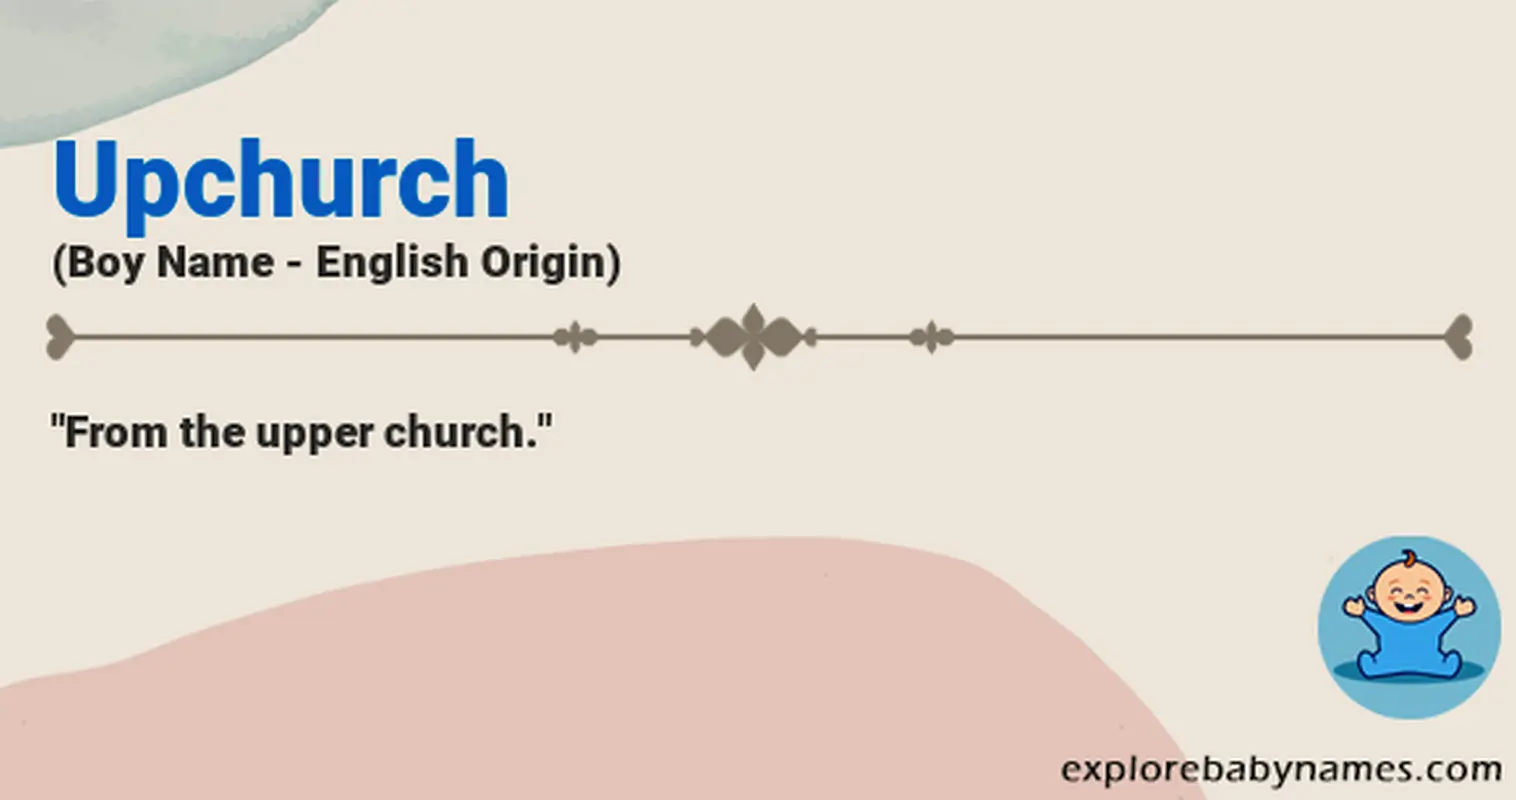 Meaning of Upchurch